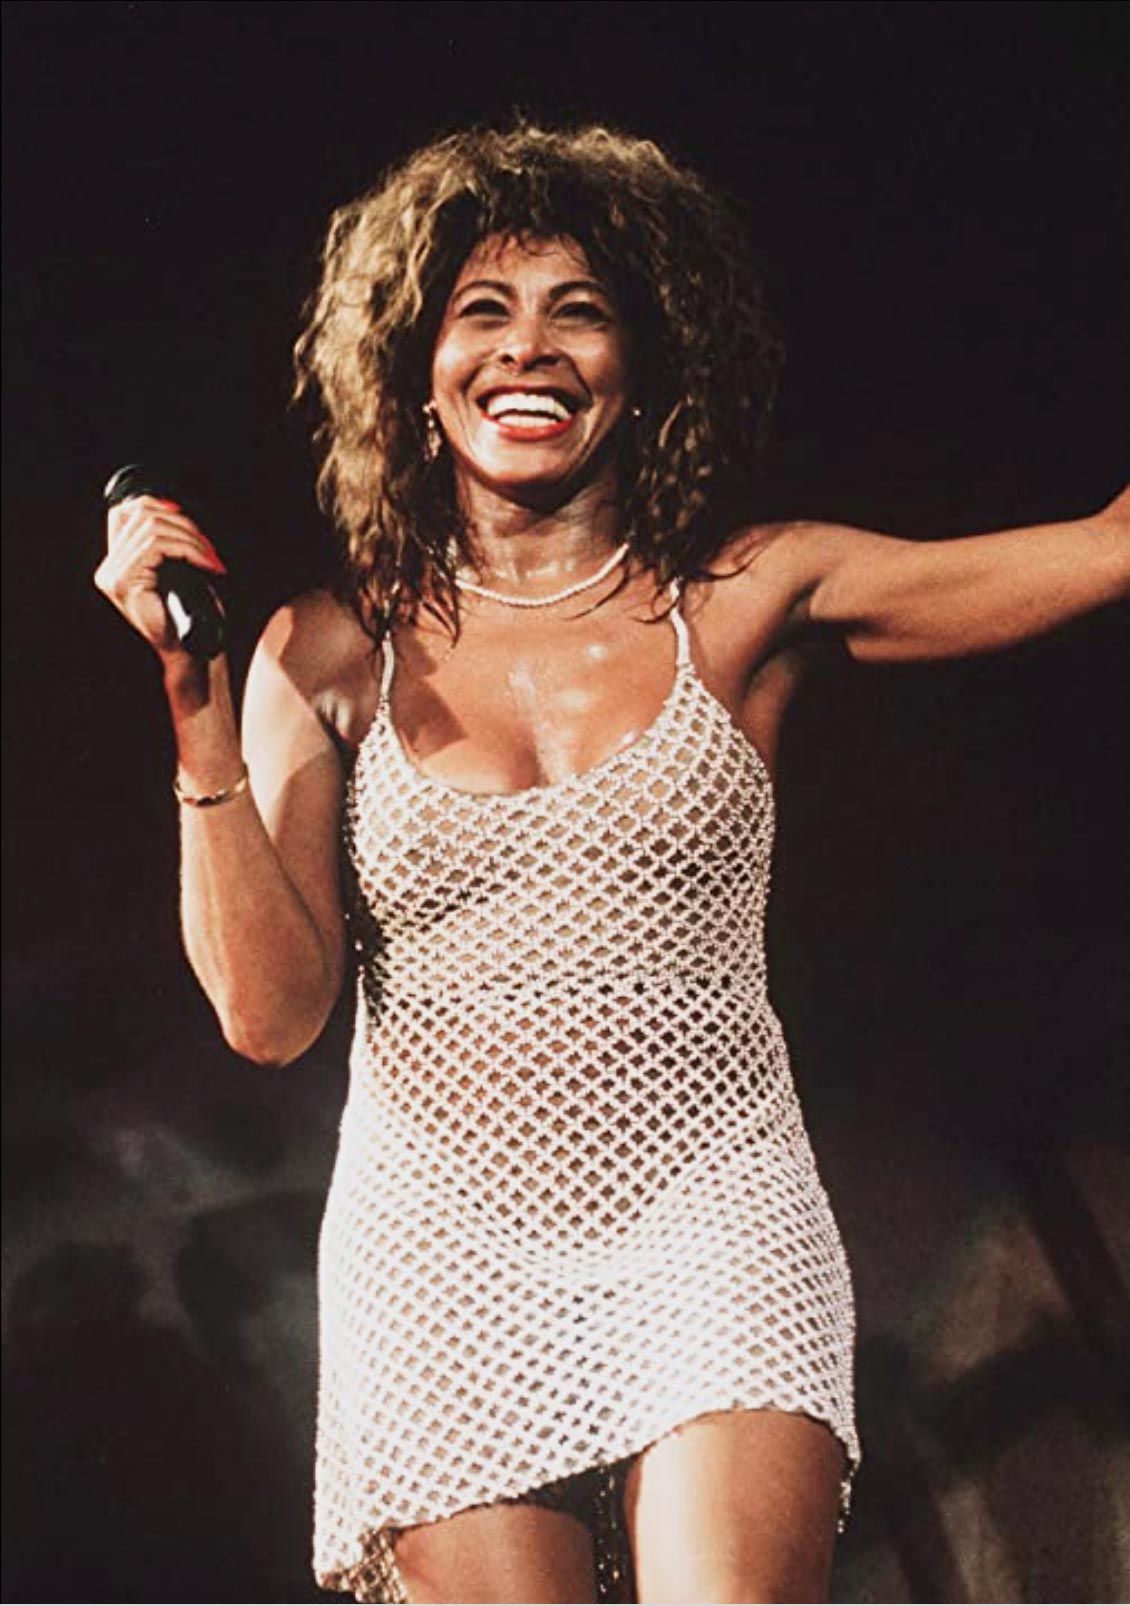 Tina Turner on stage in a cut out mini dress